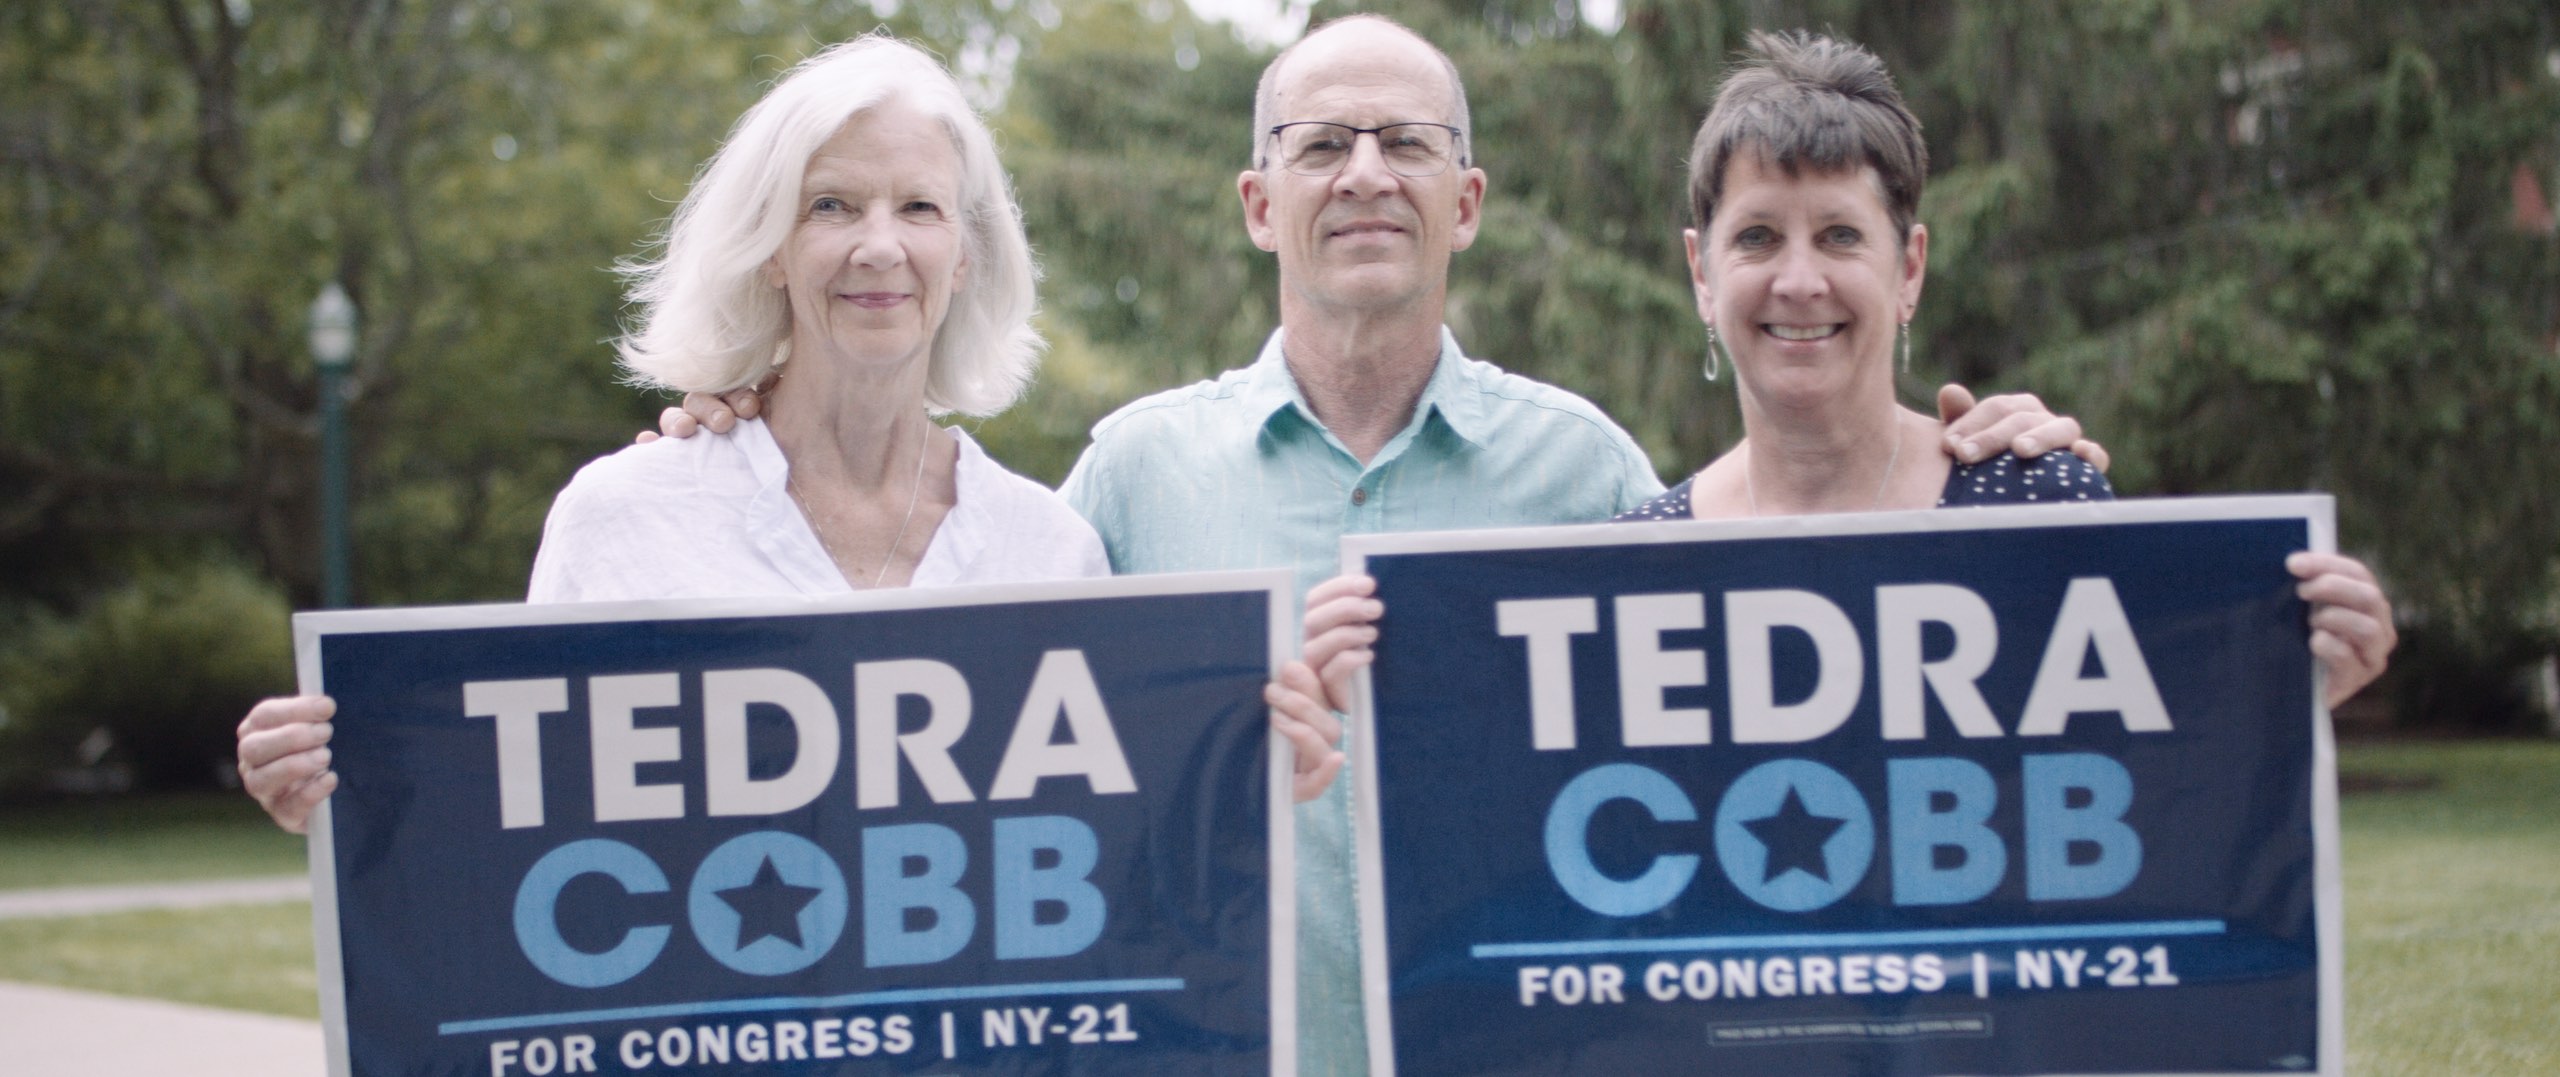 Dailies Political season with 76 Words Man in light blue shirt between two women holding Tedra Cobb for Congress NY 21 signs